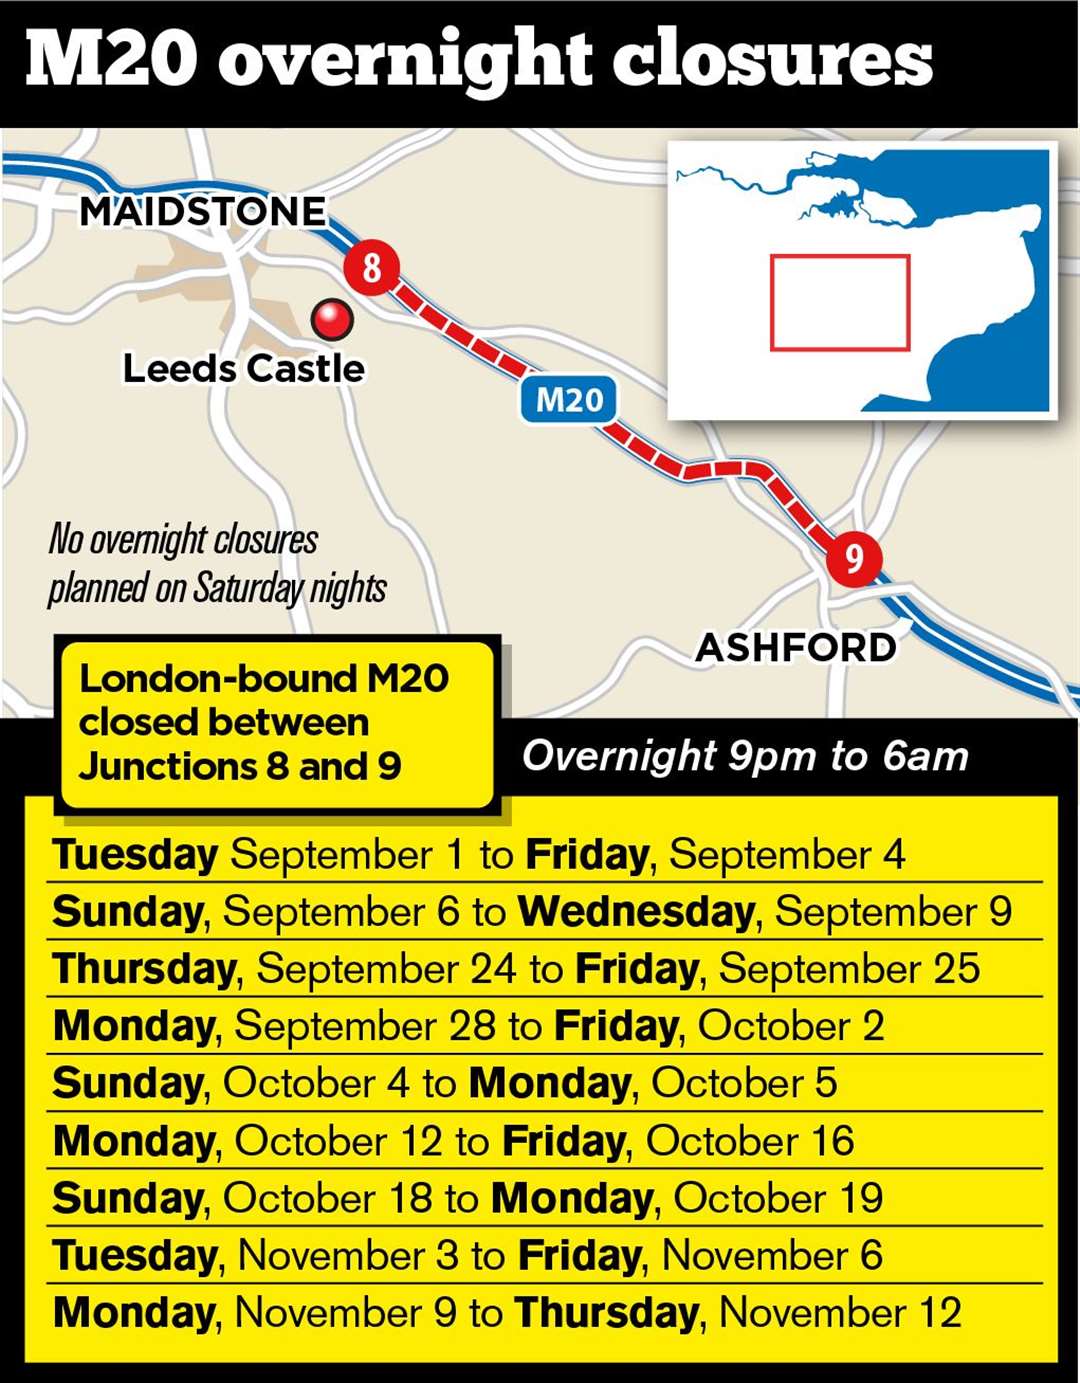 The London-bound M20 closures planned by Highways England